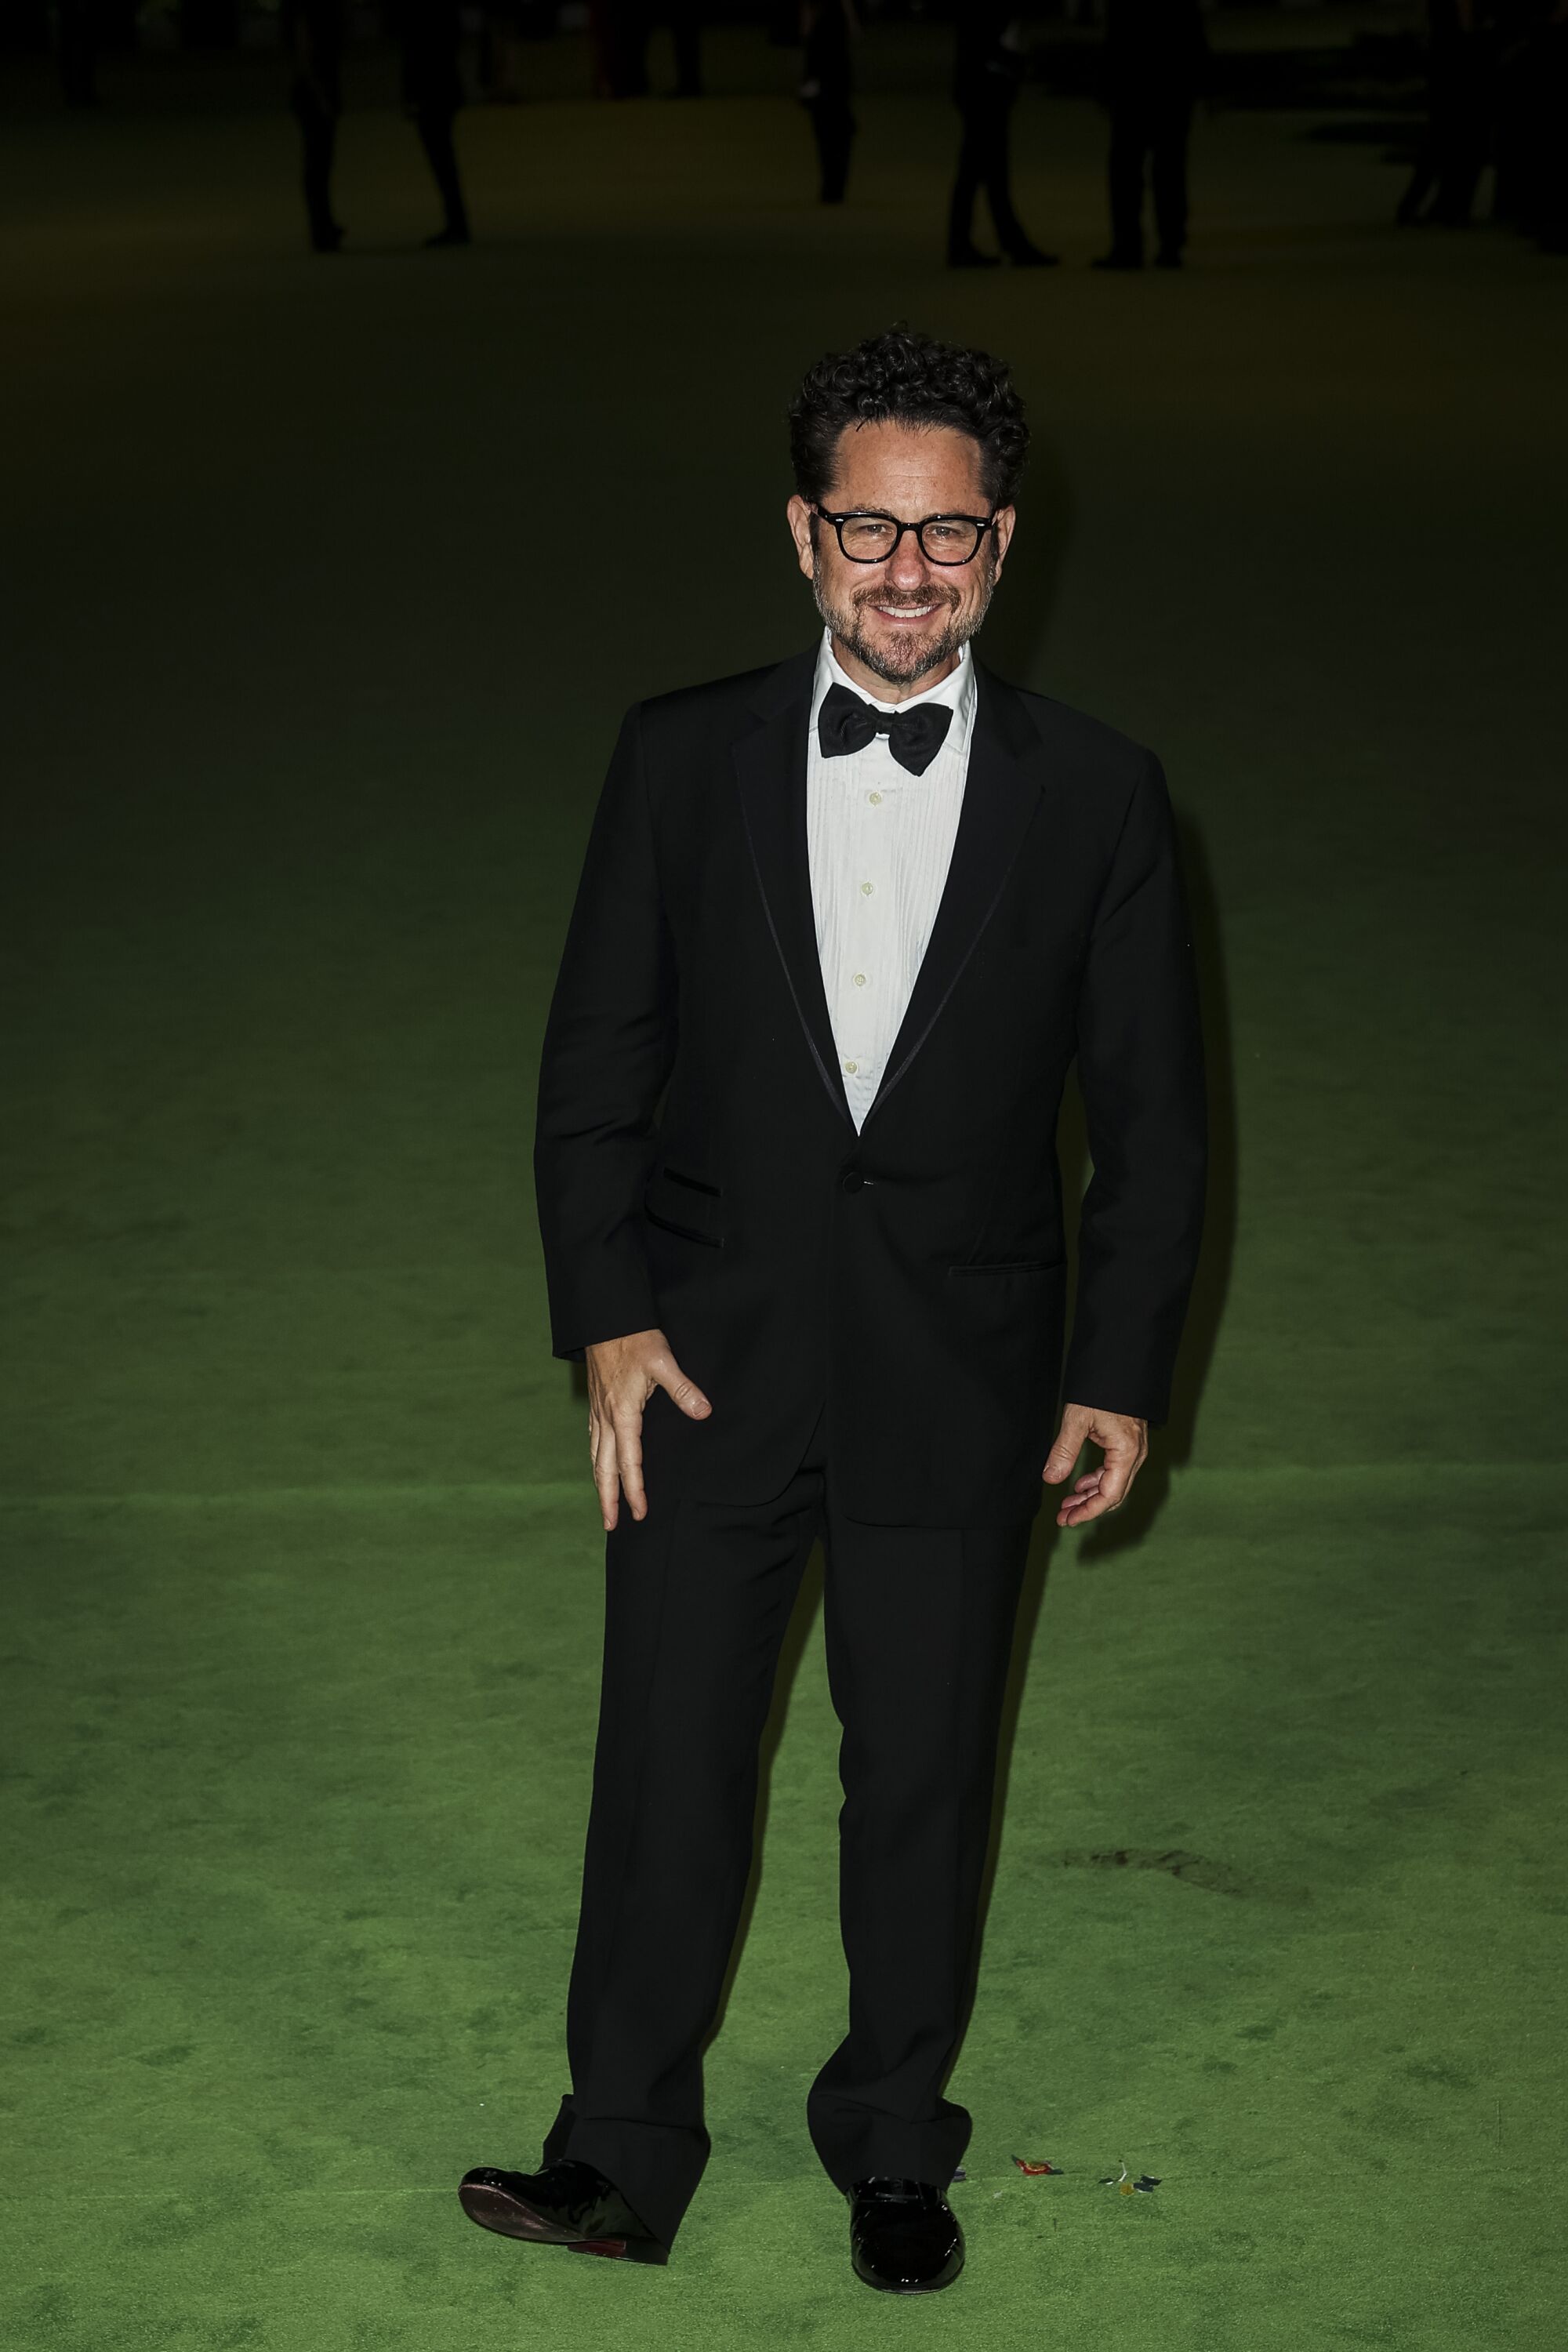 A man in a black tuxedo and bow tie posing on a green carpet